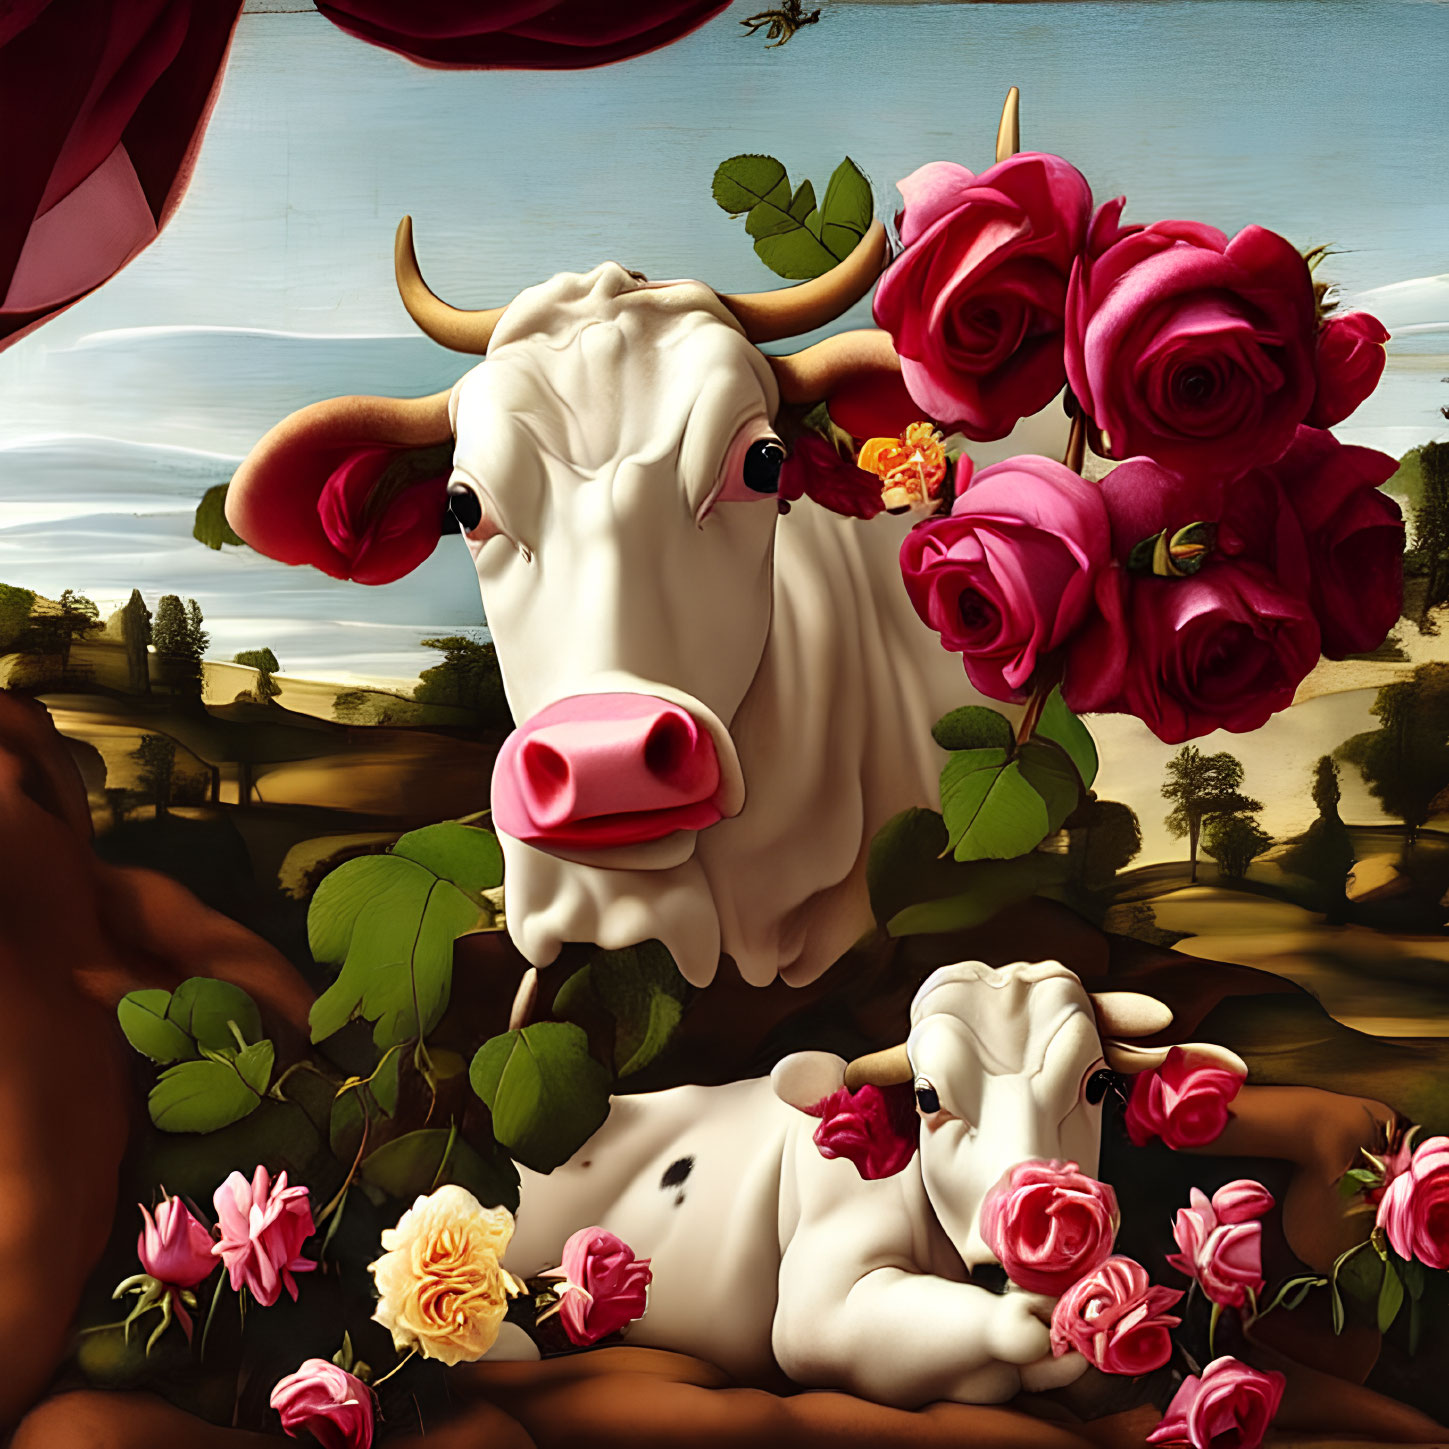 Colorful Cow with Pink Nose Surrounded by Roses in Pastoral Landscape